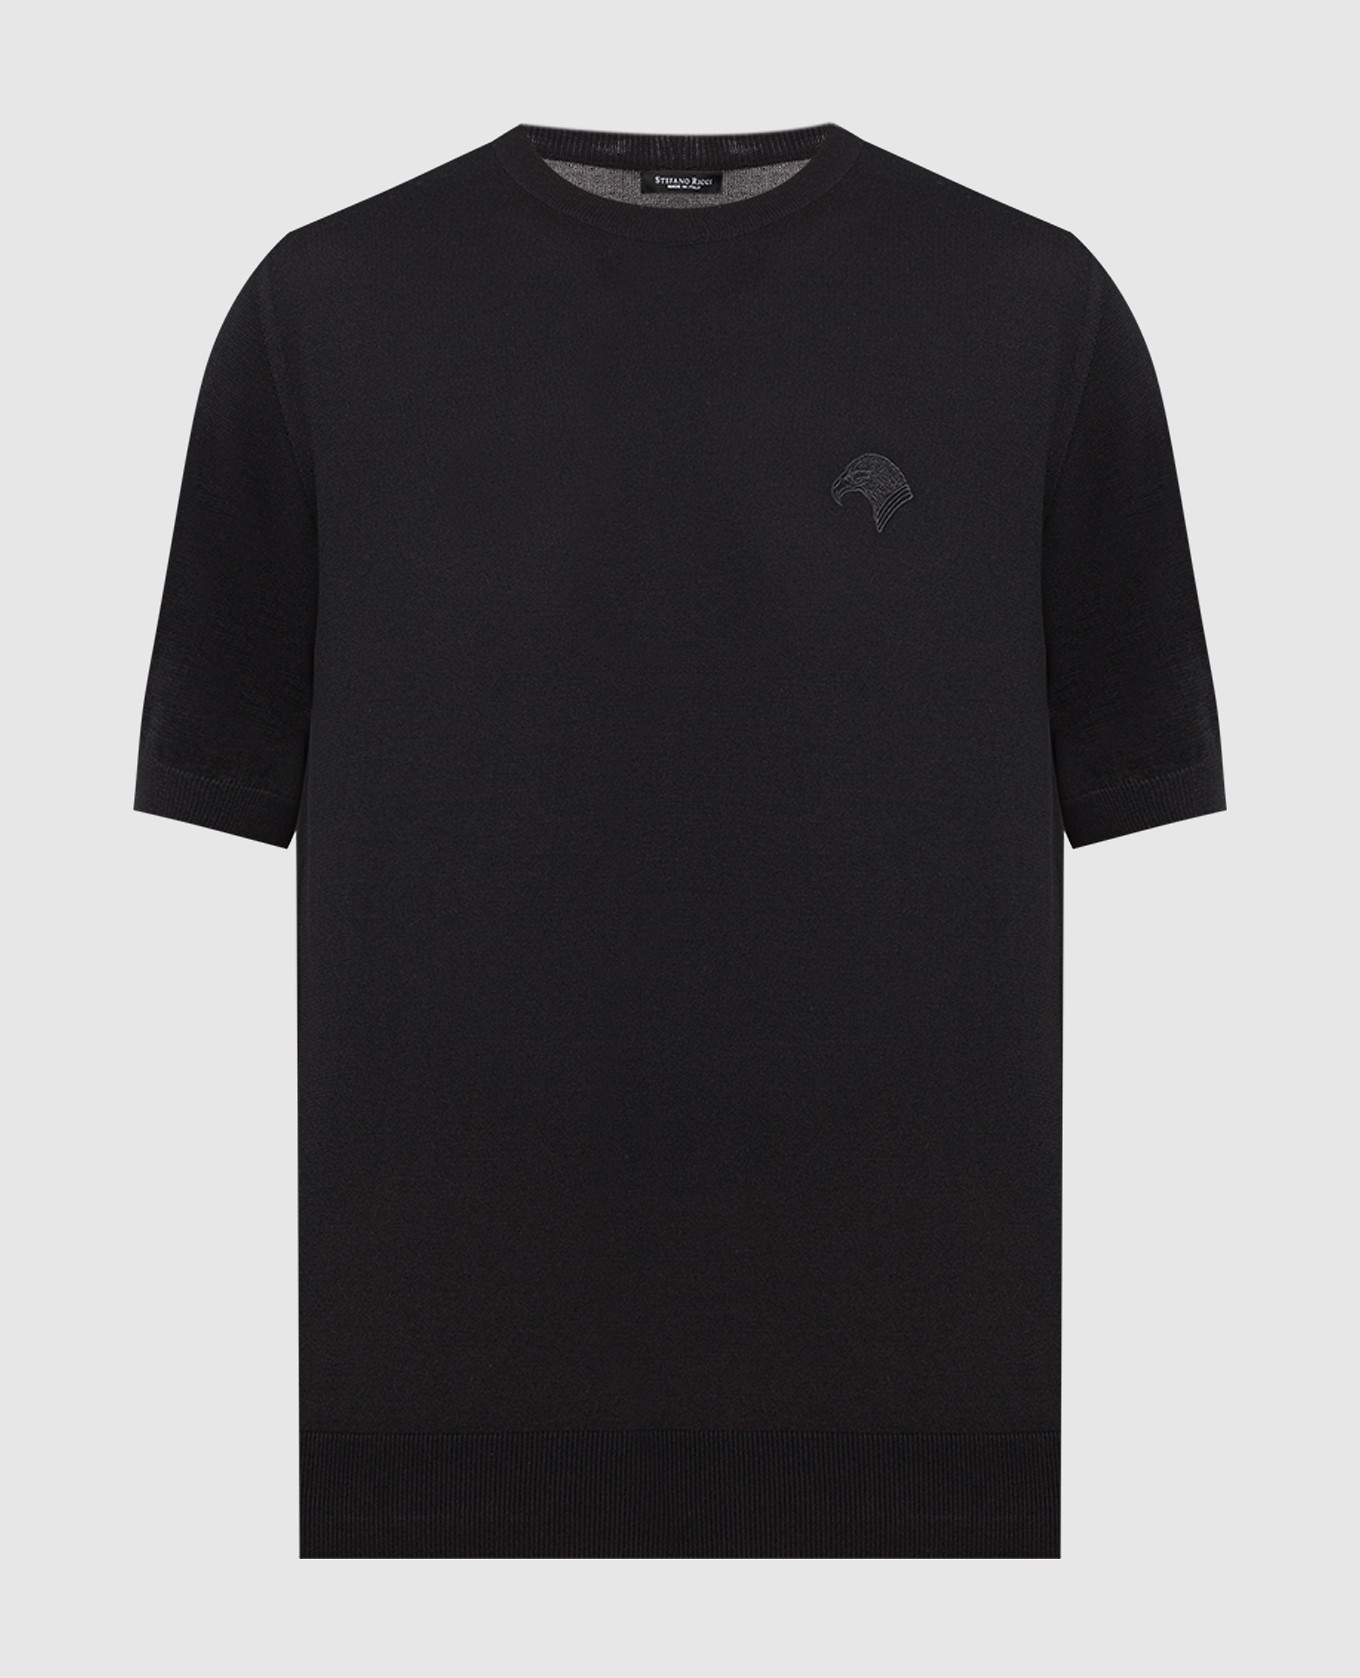 Black t-shirt with logo embroidery